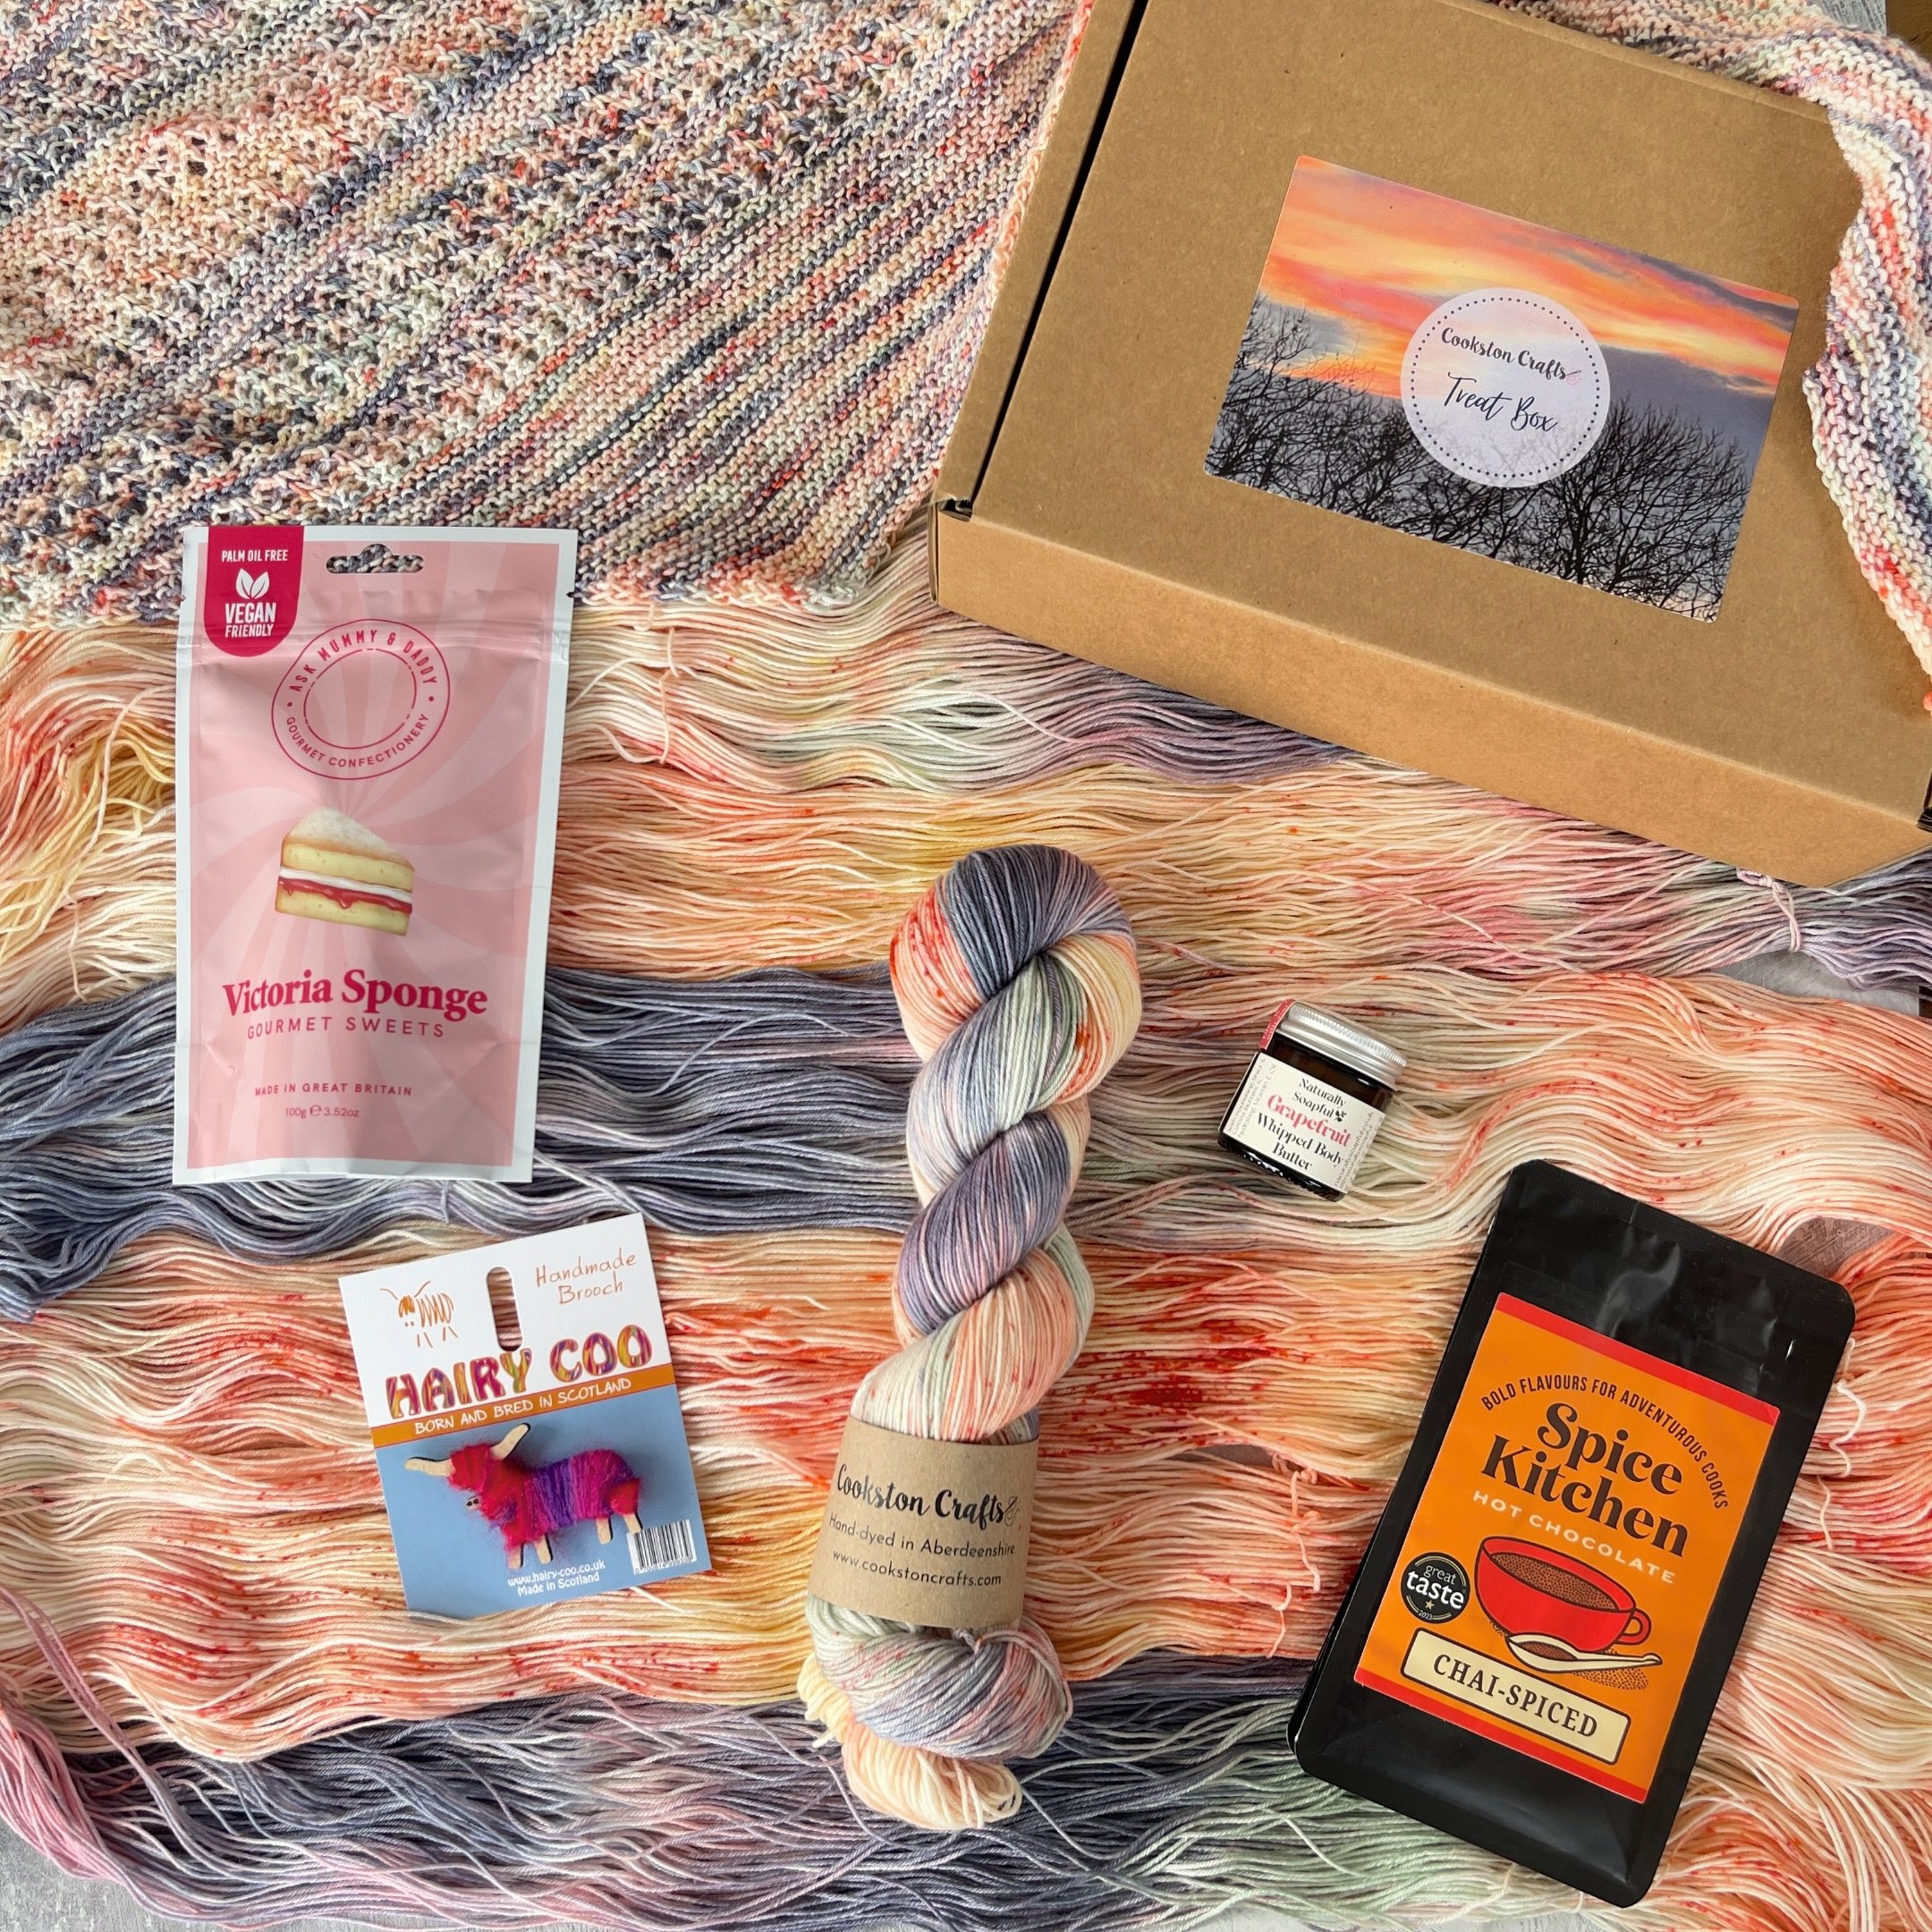 March Treat Box reveal!!

I chose a picture of these beautiful nacreous clouds that appeared in the sky over the house on Christmas Eve

The yarn picked up on the steel blue of the sky and the pink green and orange glow of the clouds.  It&rsquo;s a v